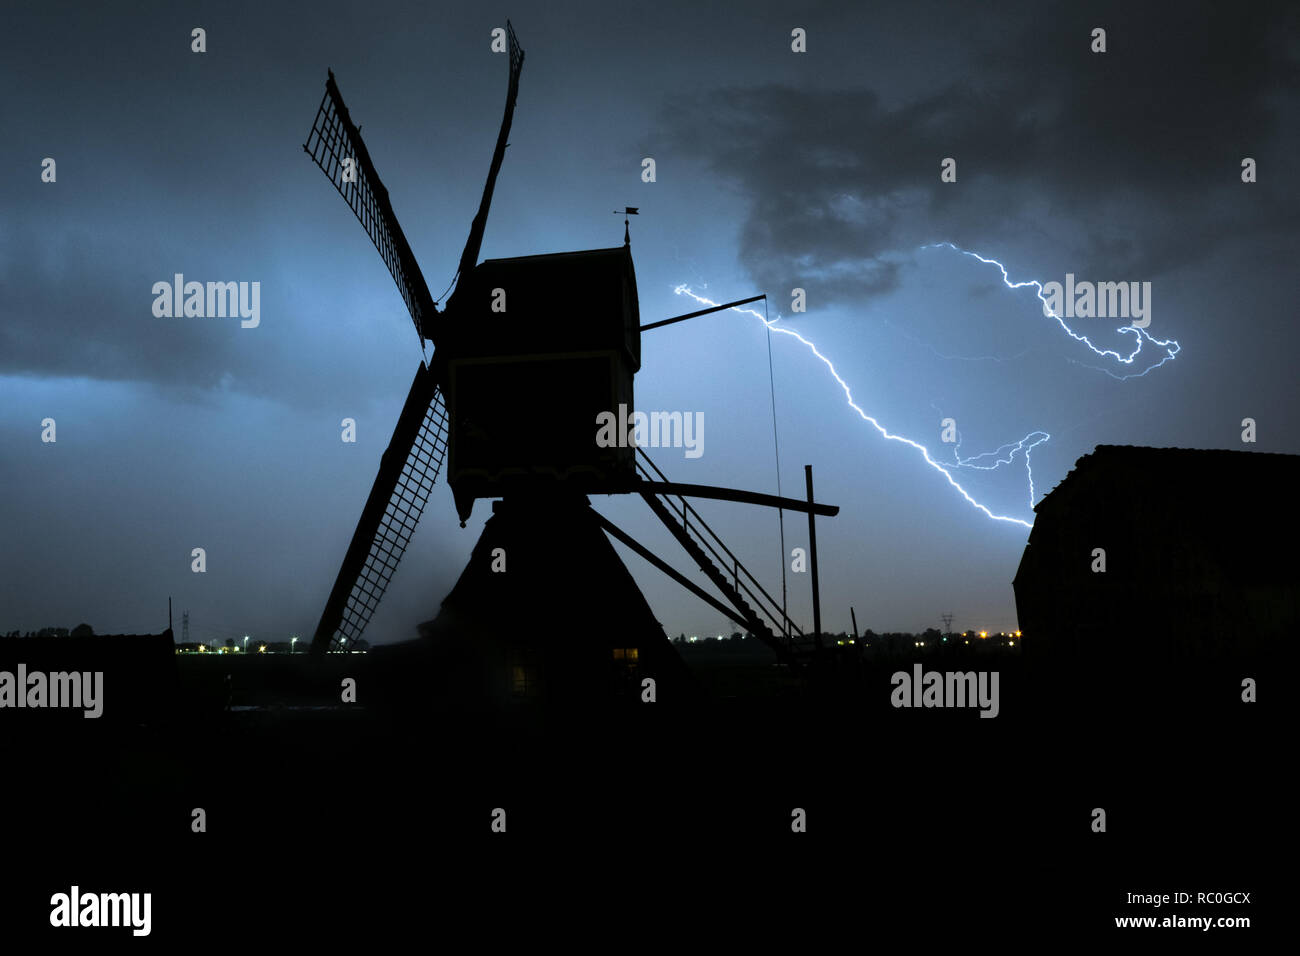 Windmill silhouette with powerful lightning bolts streaking through the sky during a severe thunderstorm in Holland. Stock Photo